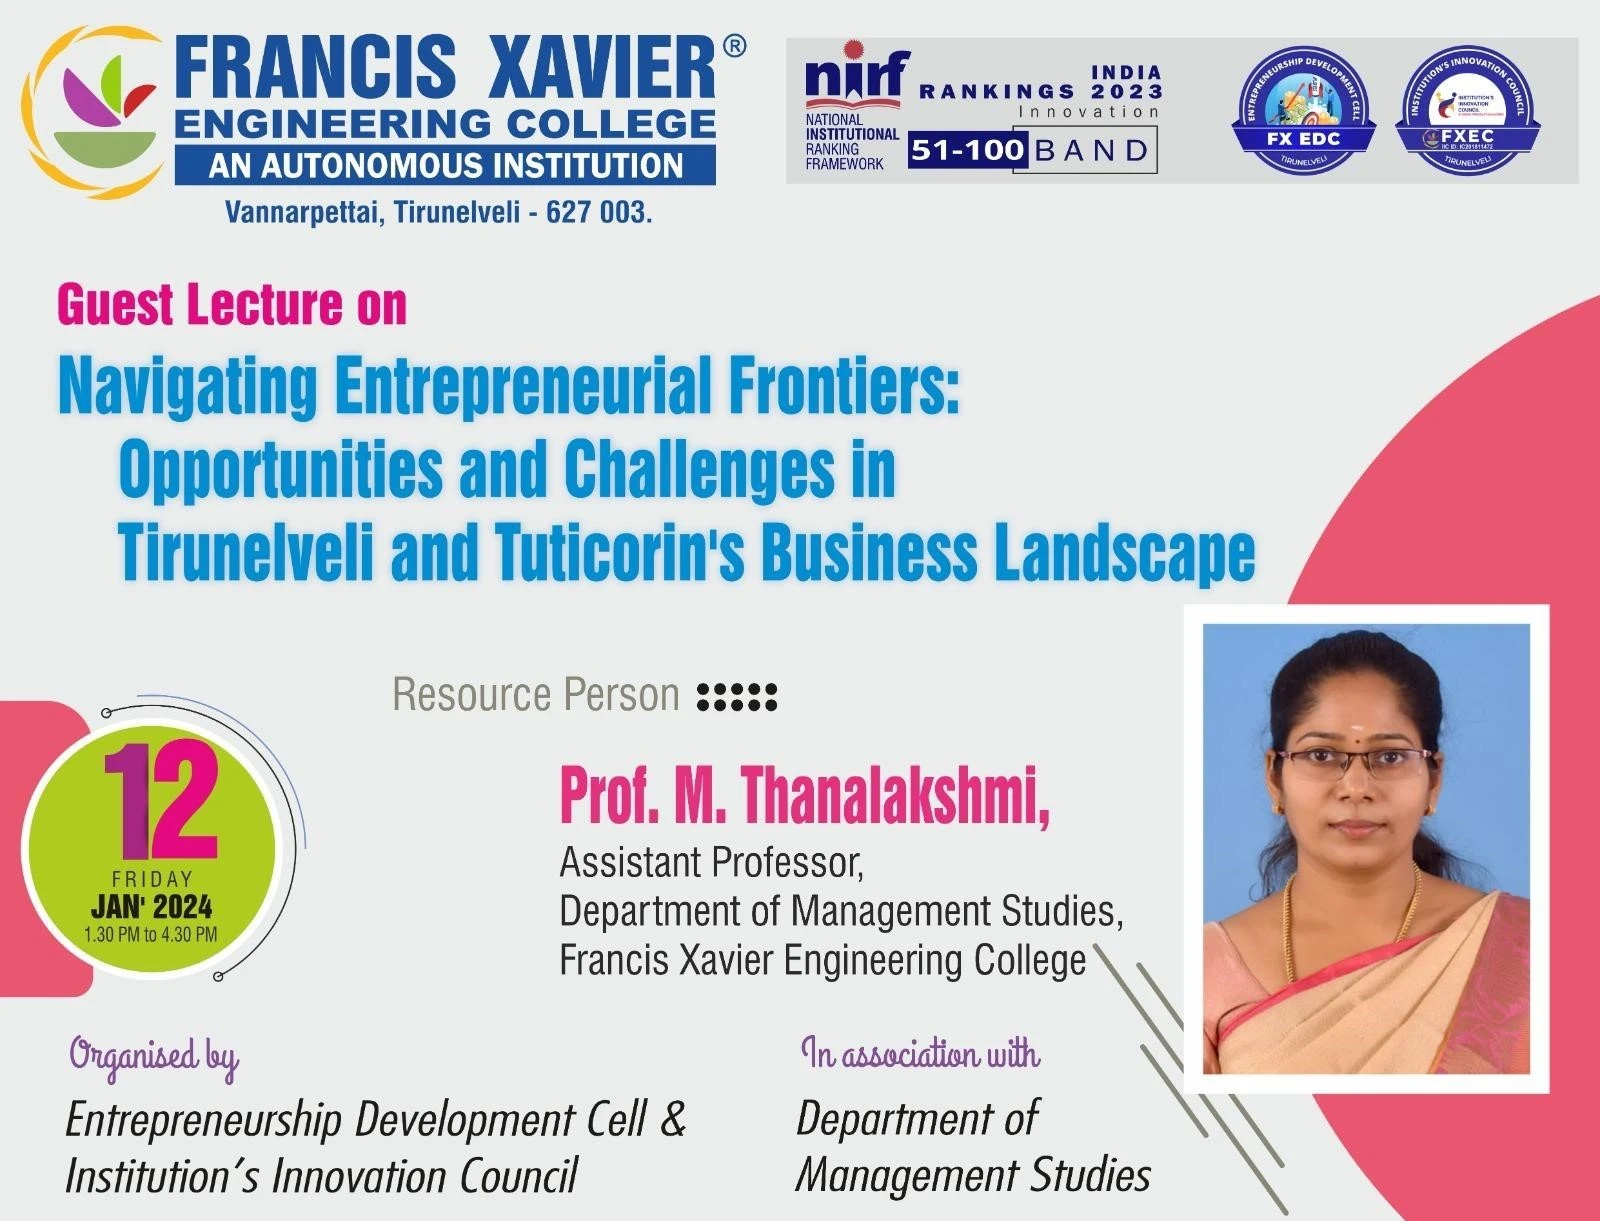  GUEST LECTURE ON NAVIGATING ENTREPRENEURIAL FRONTIERS OPPORTUNITIES AND CHALLENGES IN TIRUNELVELI AND TUTICORIN BUSINESS LANDSCAPE